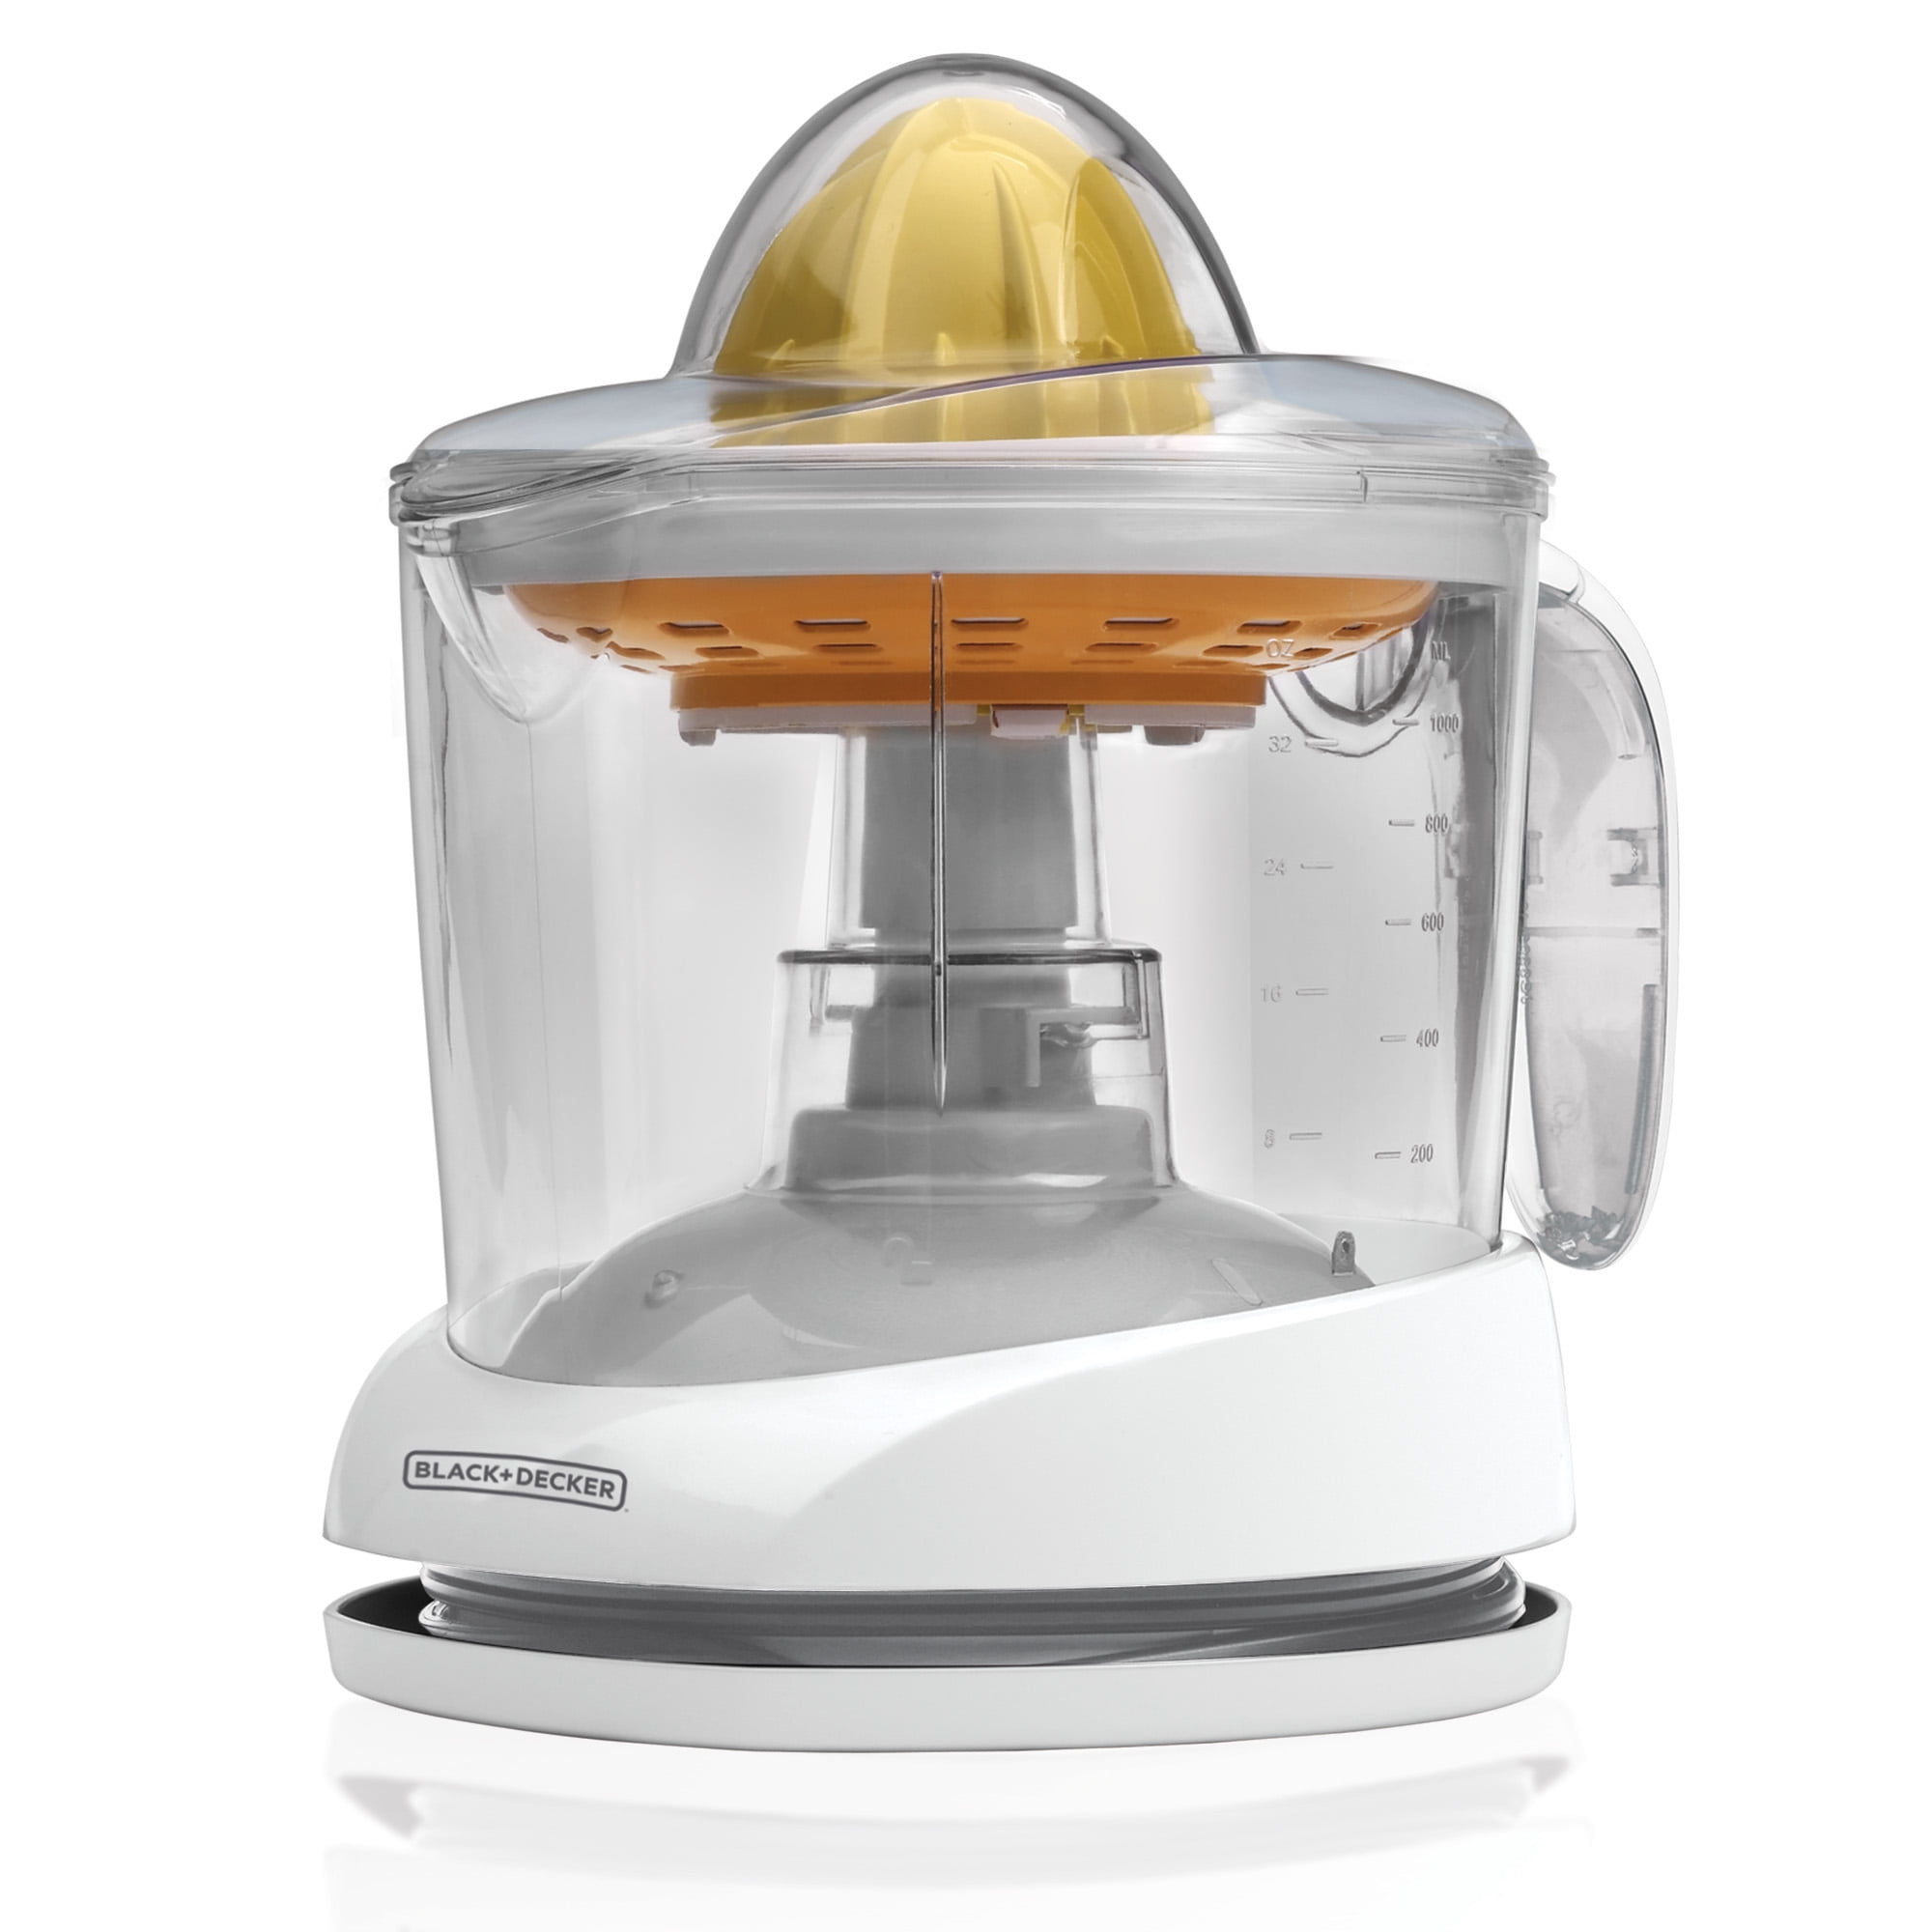  Black+Decker HC150B 1.5-Cup One-Touch Electric Food Chopper,  Capacity & 32oz Citrus Juicer, White, CJ650W,Small: Home & Kitchen